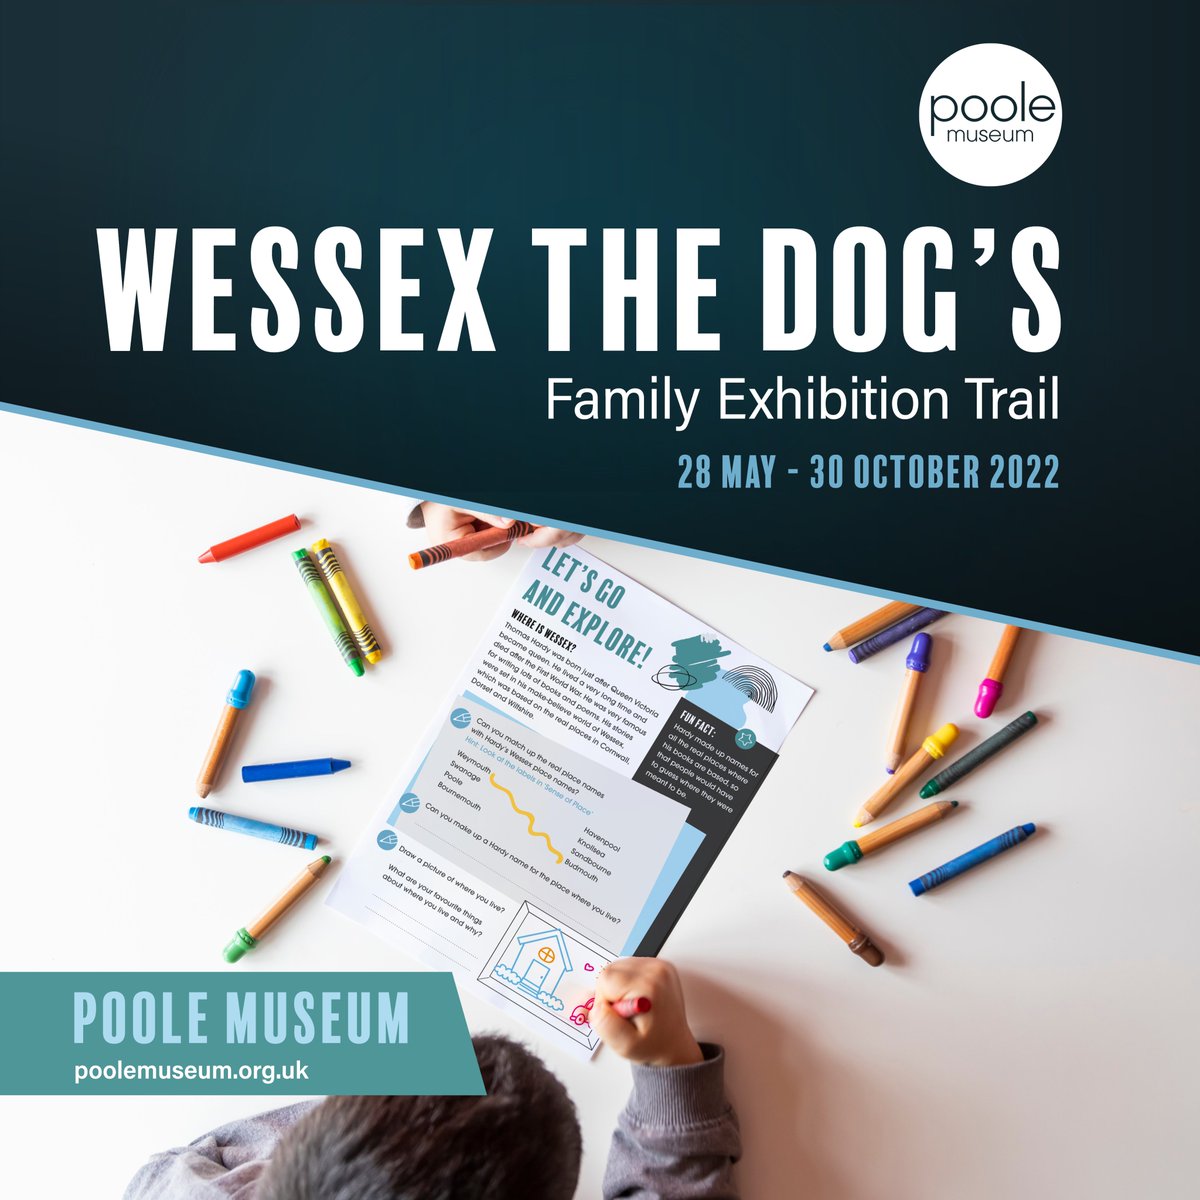 Looking for some family fun? Join Wessex the Dog on his Family Trail around our Hardy's Wessex exhibition galleries. Through a fun detective trail, look for clues in the objects, solve puzzles and draw your own sketches! Available with adult exhibition entry. #HardysWessex